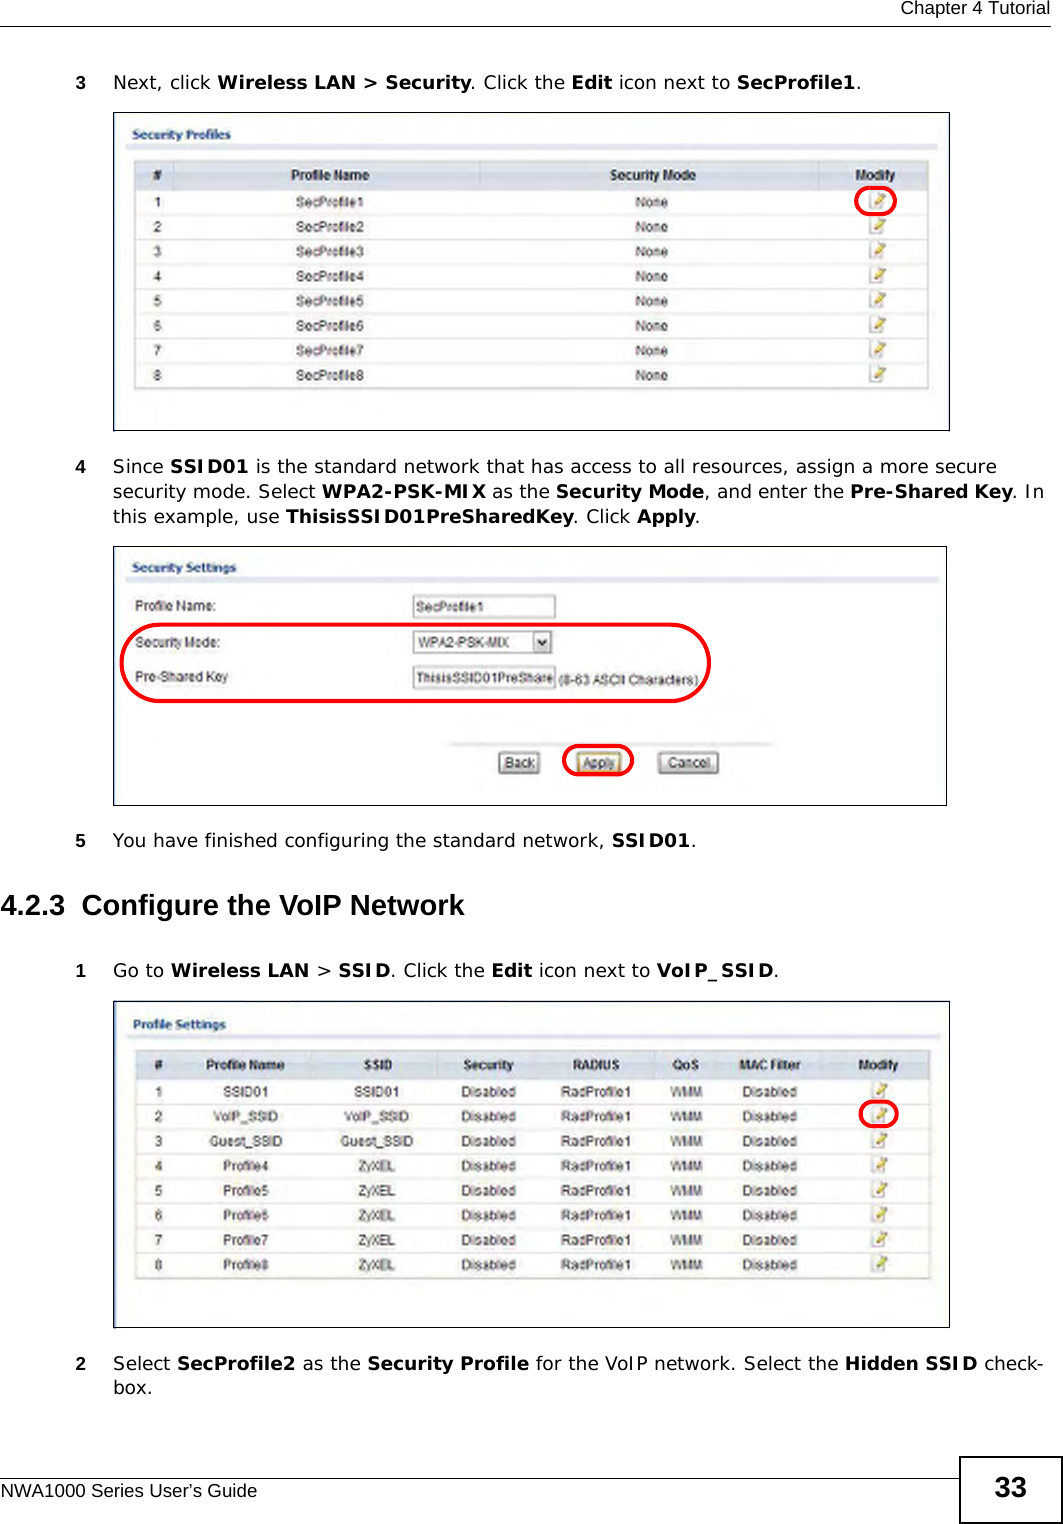  Chapter 4 TutorialNWA1000 Series User’s Guide 333Next, click Wireless LAN &gt; Security. Click the Edit icon next to SecProfile1. 4Since SSID01 is the standard network that has access to all resources, assign a more secure security mode. Select WPA2-PSK-MIX as the Security Mode, and enter the Pre-Shared Key. In this example, use ThisisSSID01PreSharedKey. Click Apply. 5You have finished configuring the standard network, SSID01. 4.2.3  Configure the VoIP Network1Go to Wireless LAN &gt; SSID. Click the Edit icon next to VoIP_SSID. 2Select SecProfile2 as the Security Profile for the VoIP network. Select the Hidden SSID check-box. 